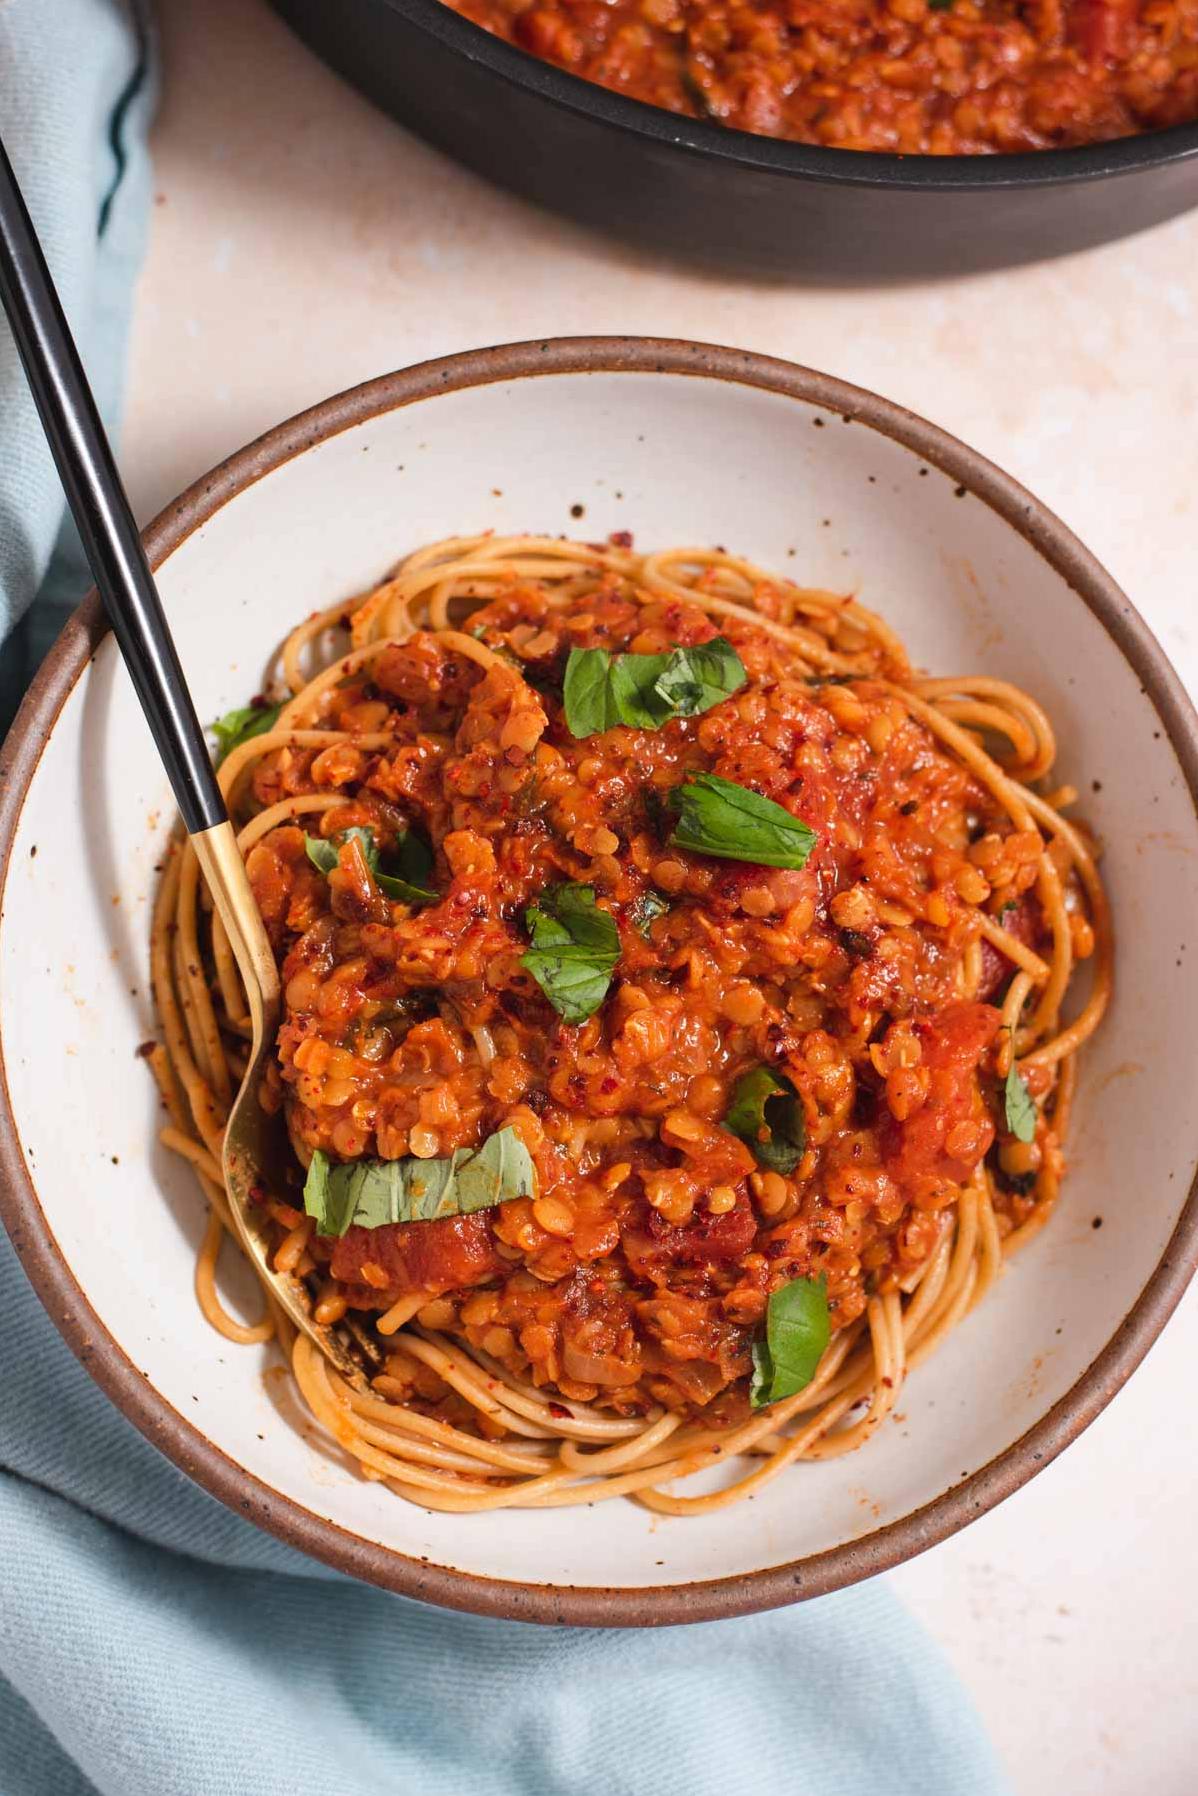  Thick and savory red lentil spaghetti sauce, packed with protein and nutrients.